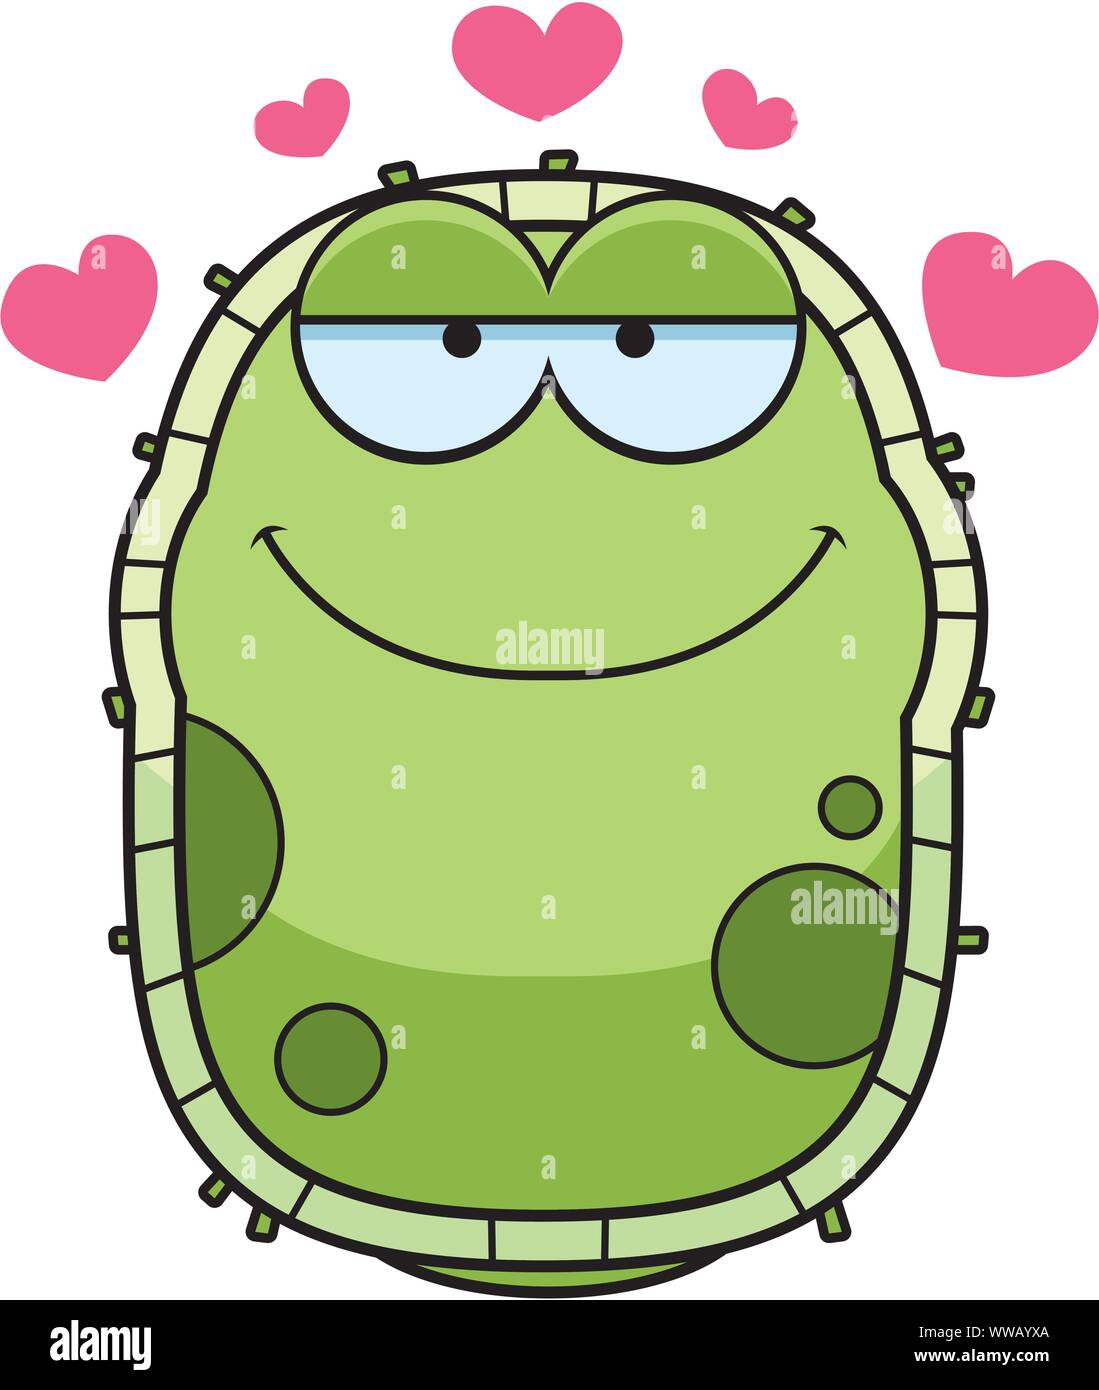 A cartoon illustration of a germ in love. Stock Vector